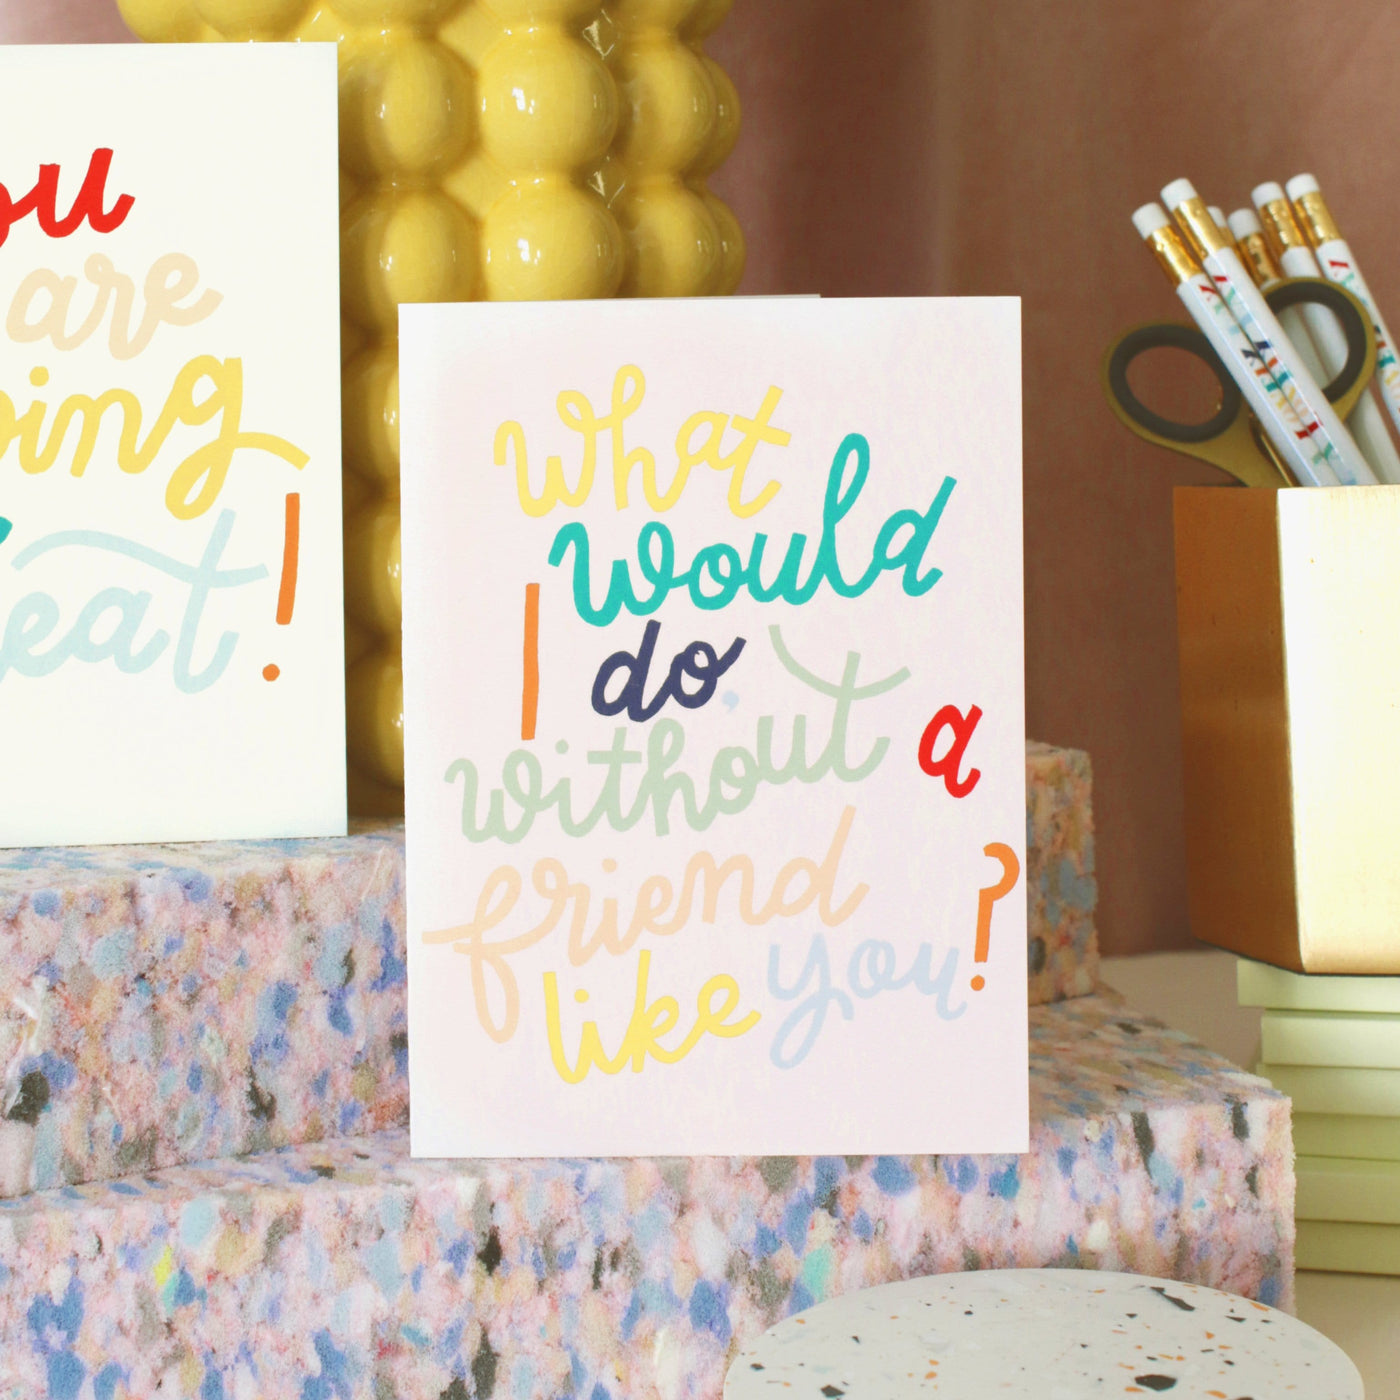 A Hand Lettered Rainbow Typography Card Which Reads What Would I Do Without A Friend Like You On A Desk - Annie Dornan Smith